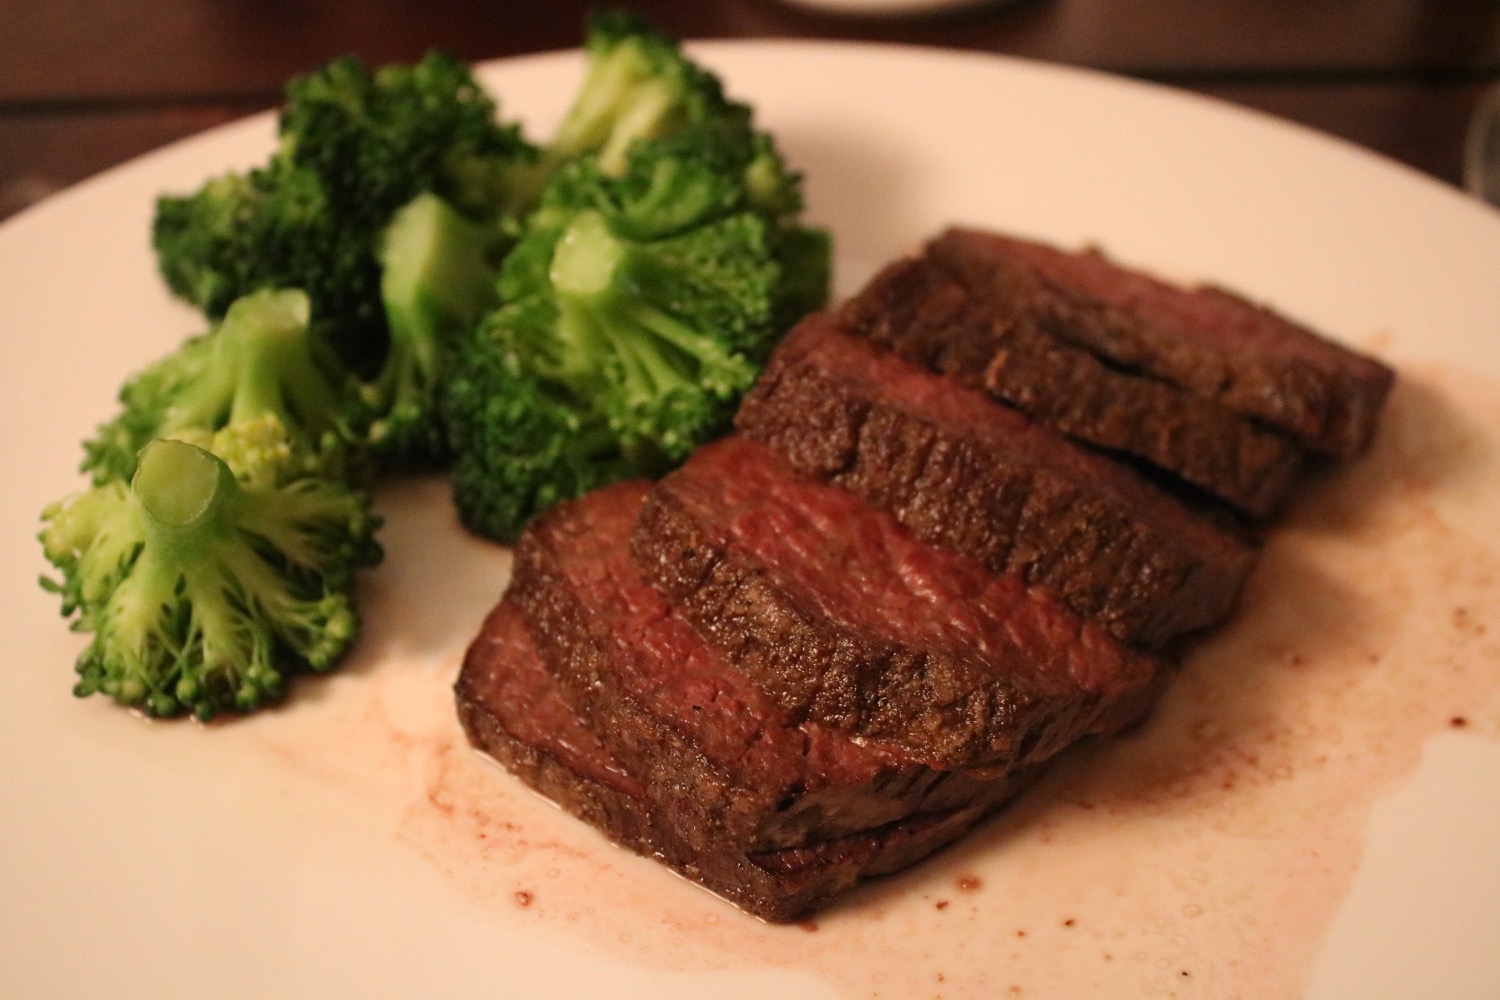 a plate of steak and broccoli